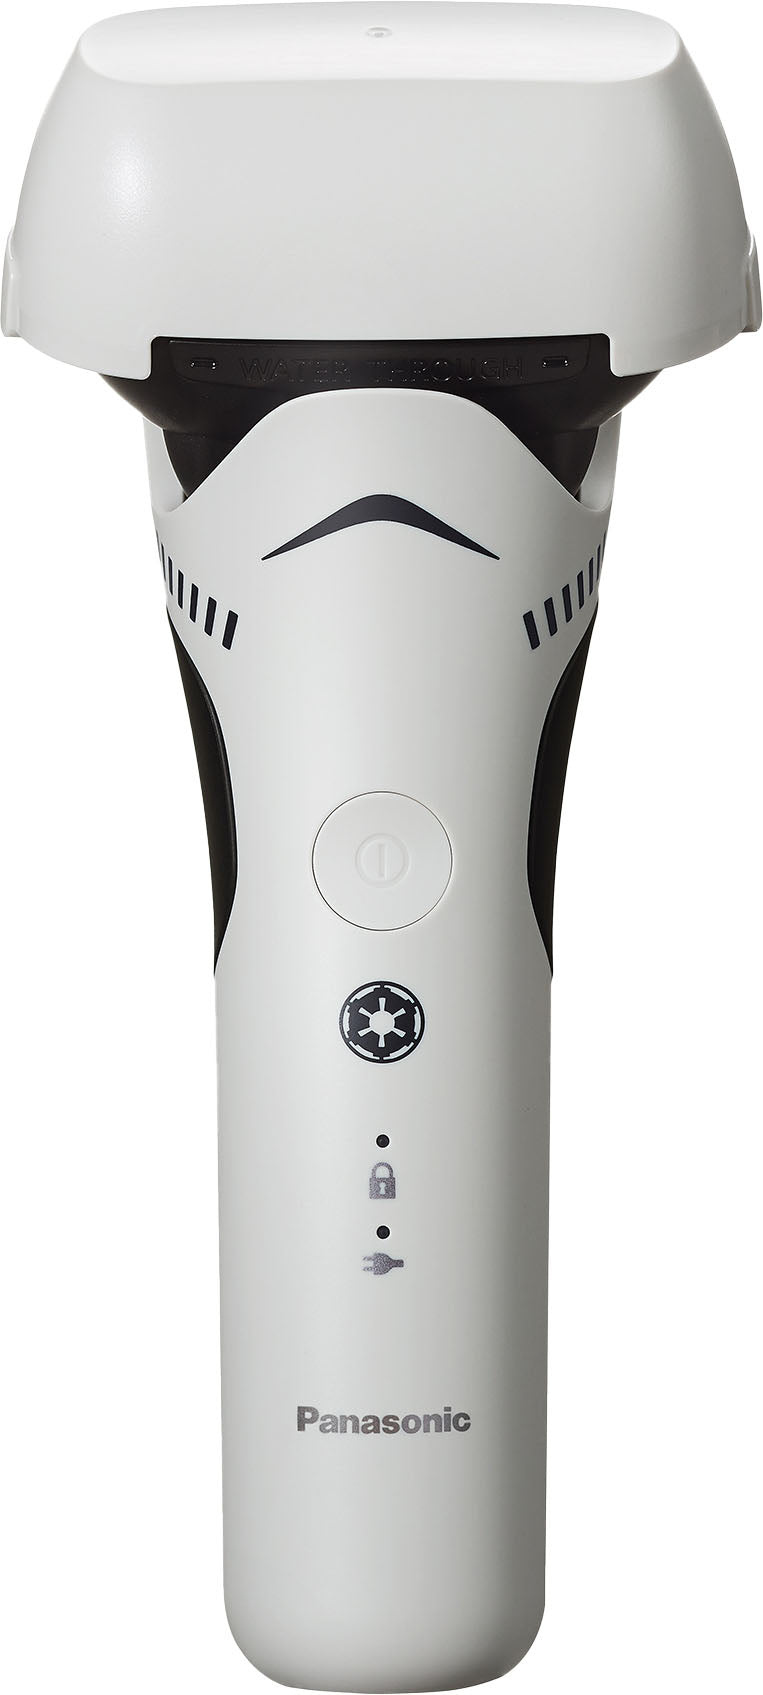 Panasonic - Star Wars Stormtrooper Wet/Dry Electric Shaver with 3-Blade Cutting System and Beard Sensor - white/black_1